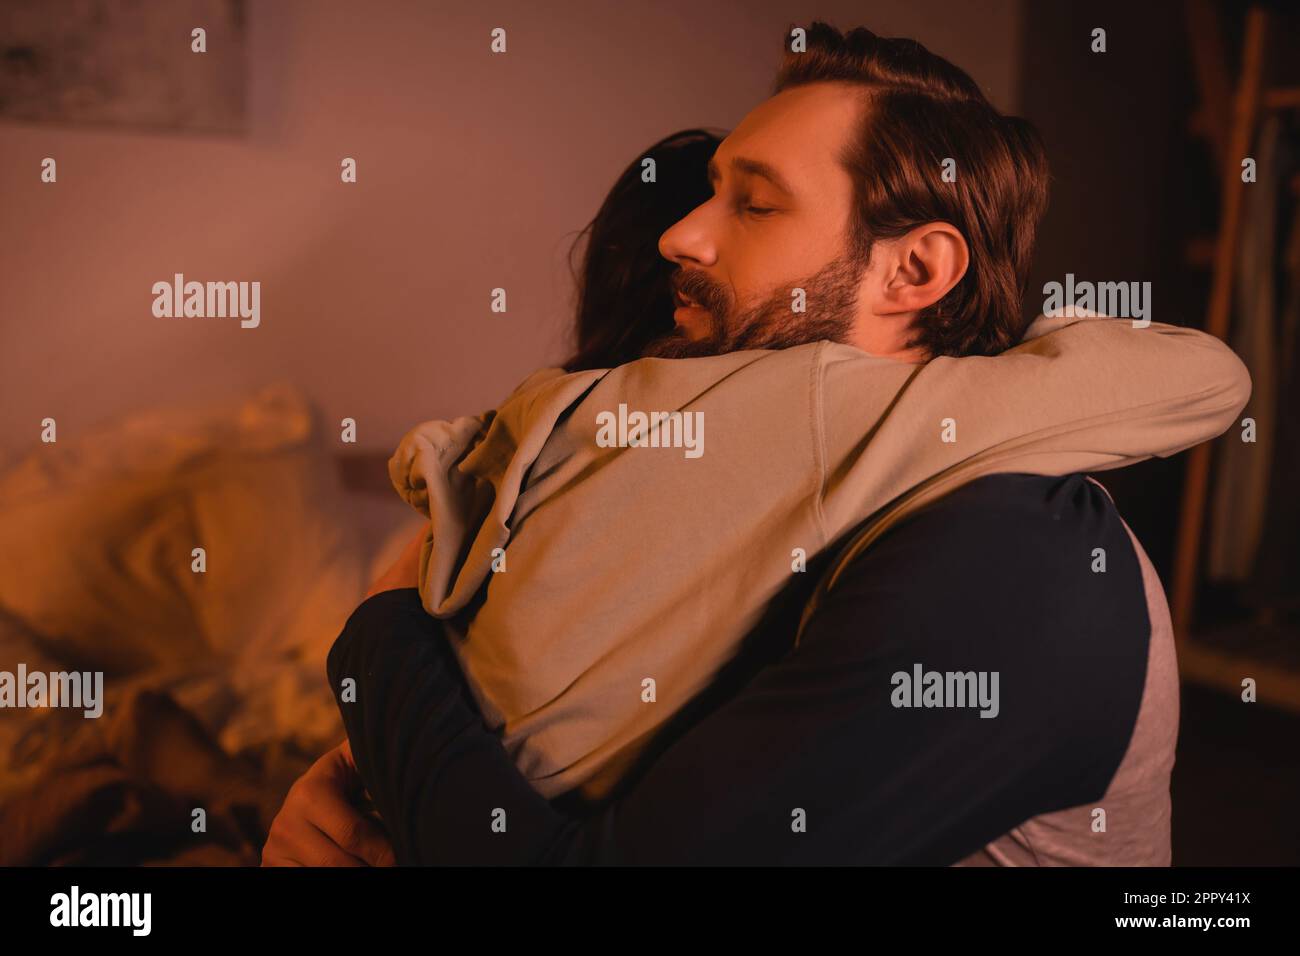 caring man hugging and calming down girlfriend at home in evening,stock image Stock Photo